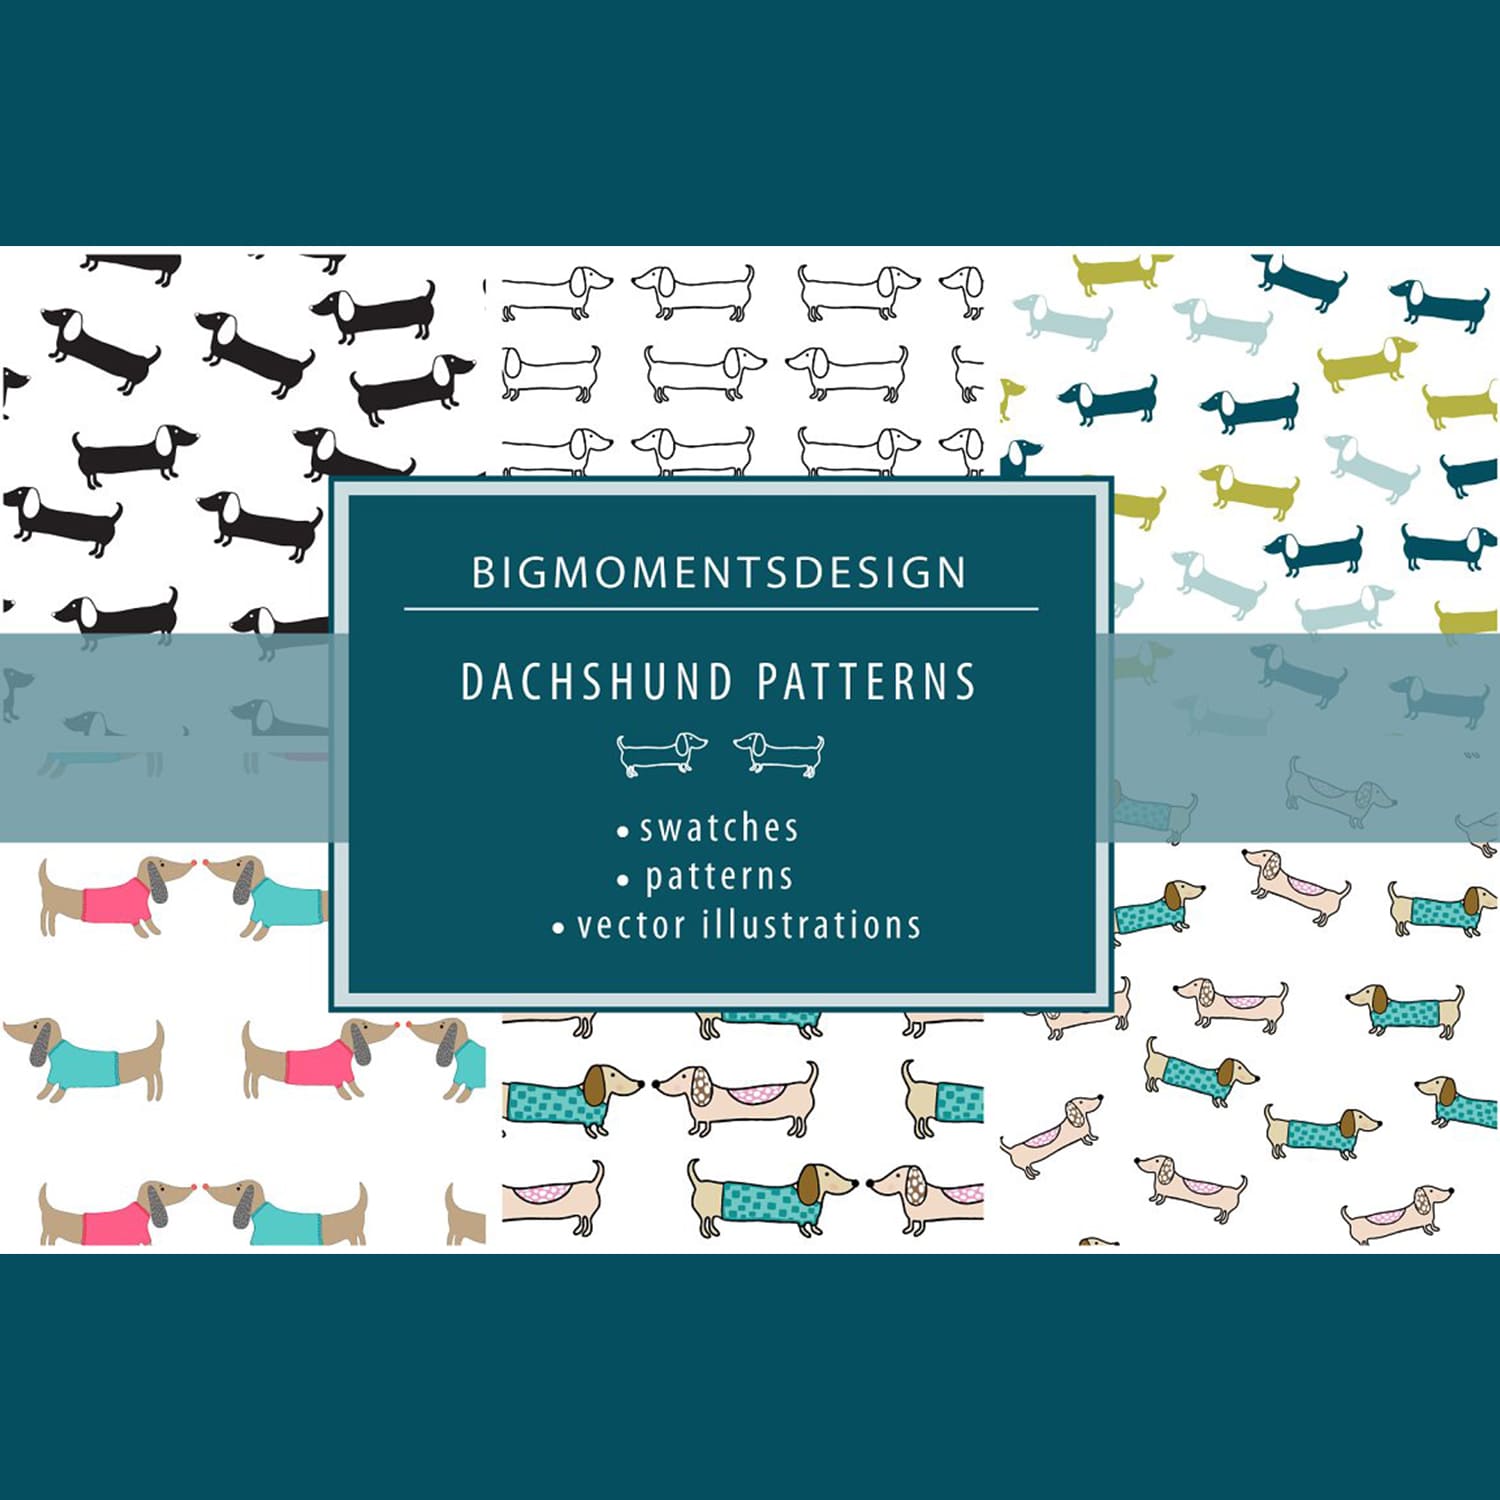 Dachshund patterns and illustrations.